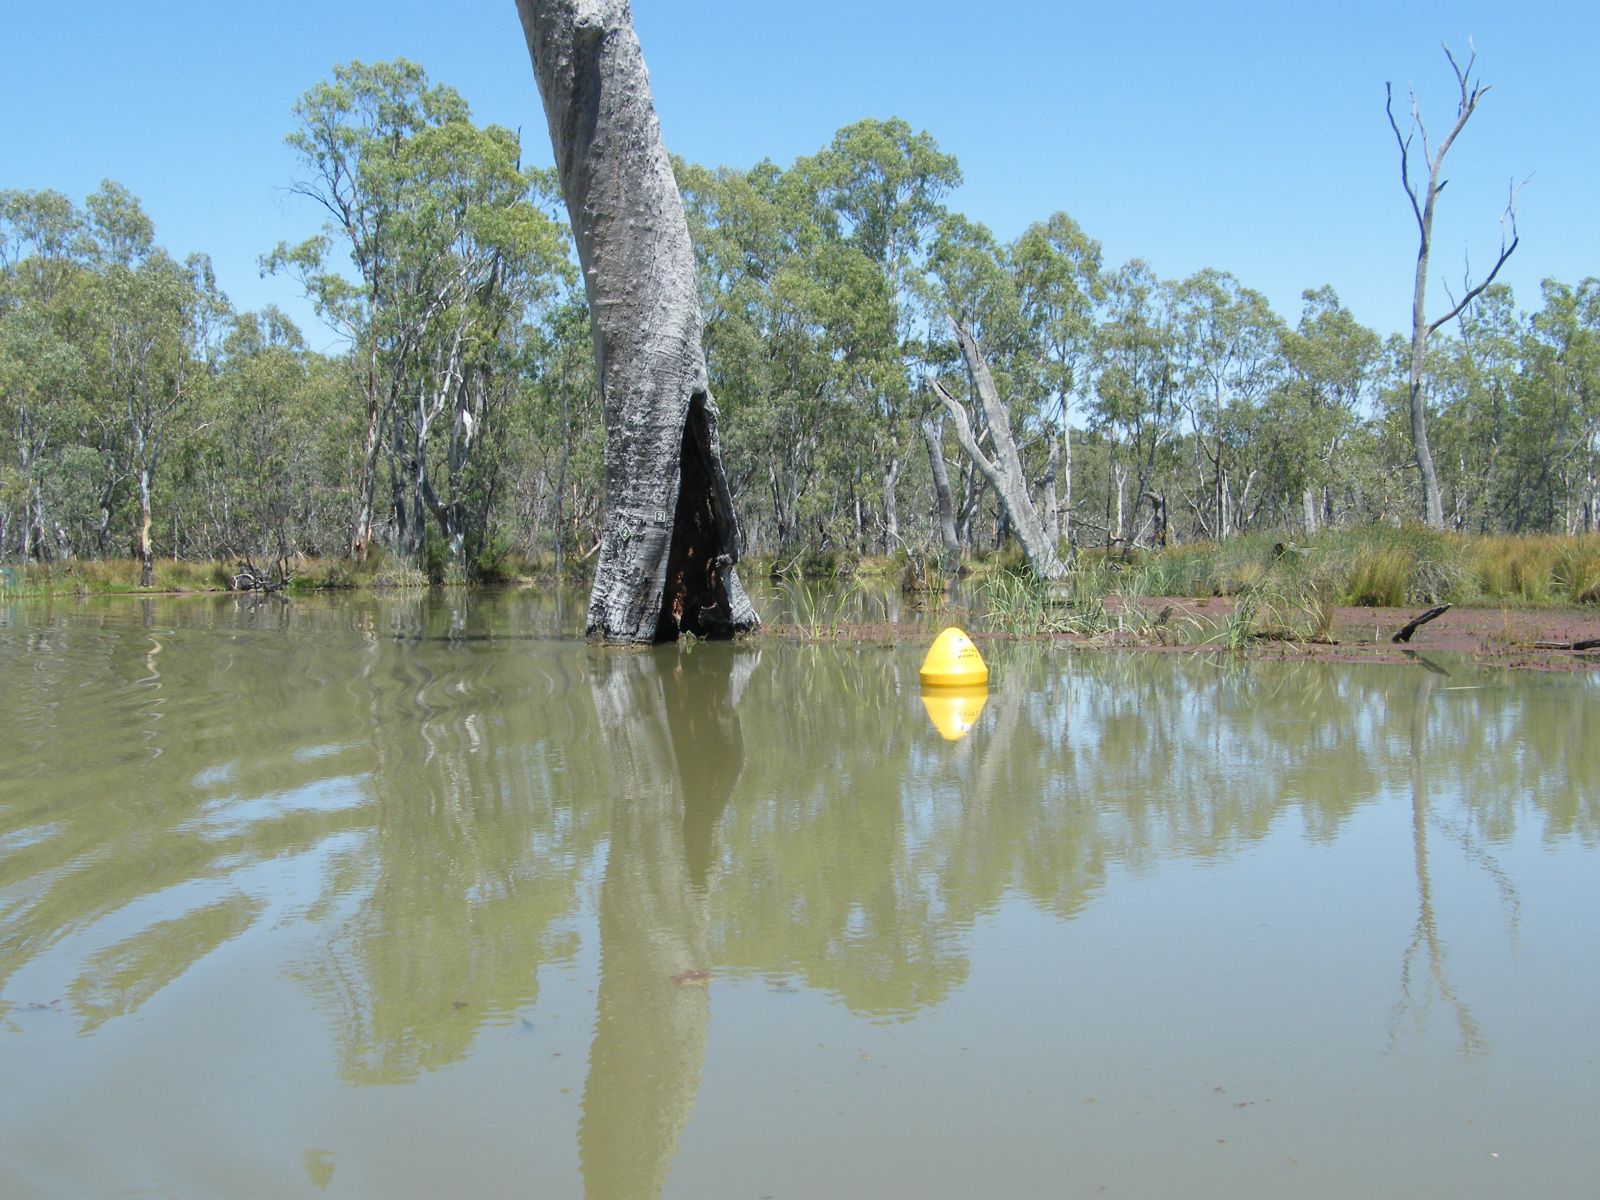 A yellow buoy floats in a creek next to a tree hollow